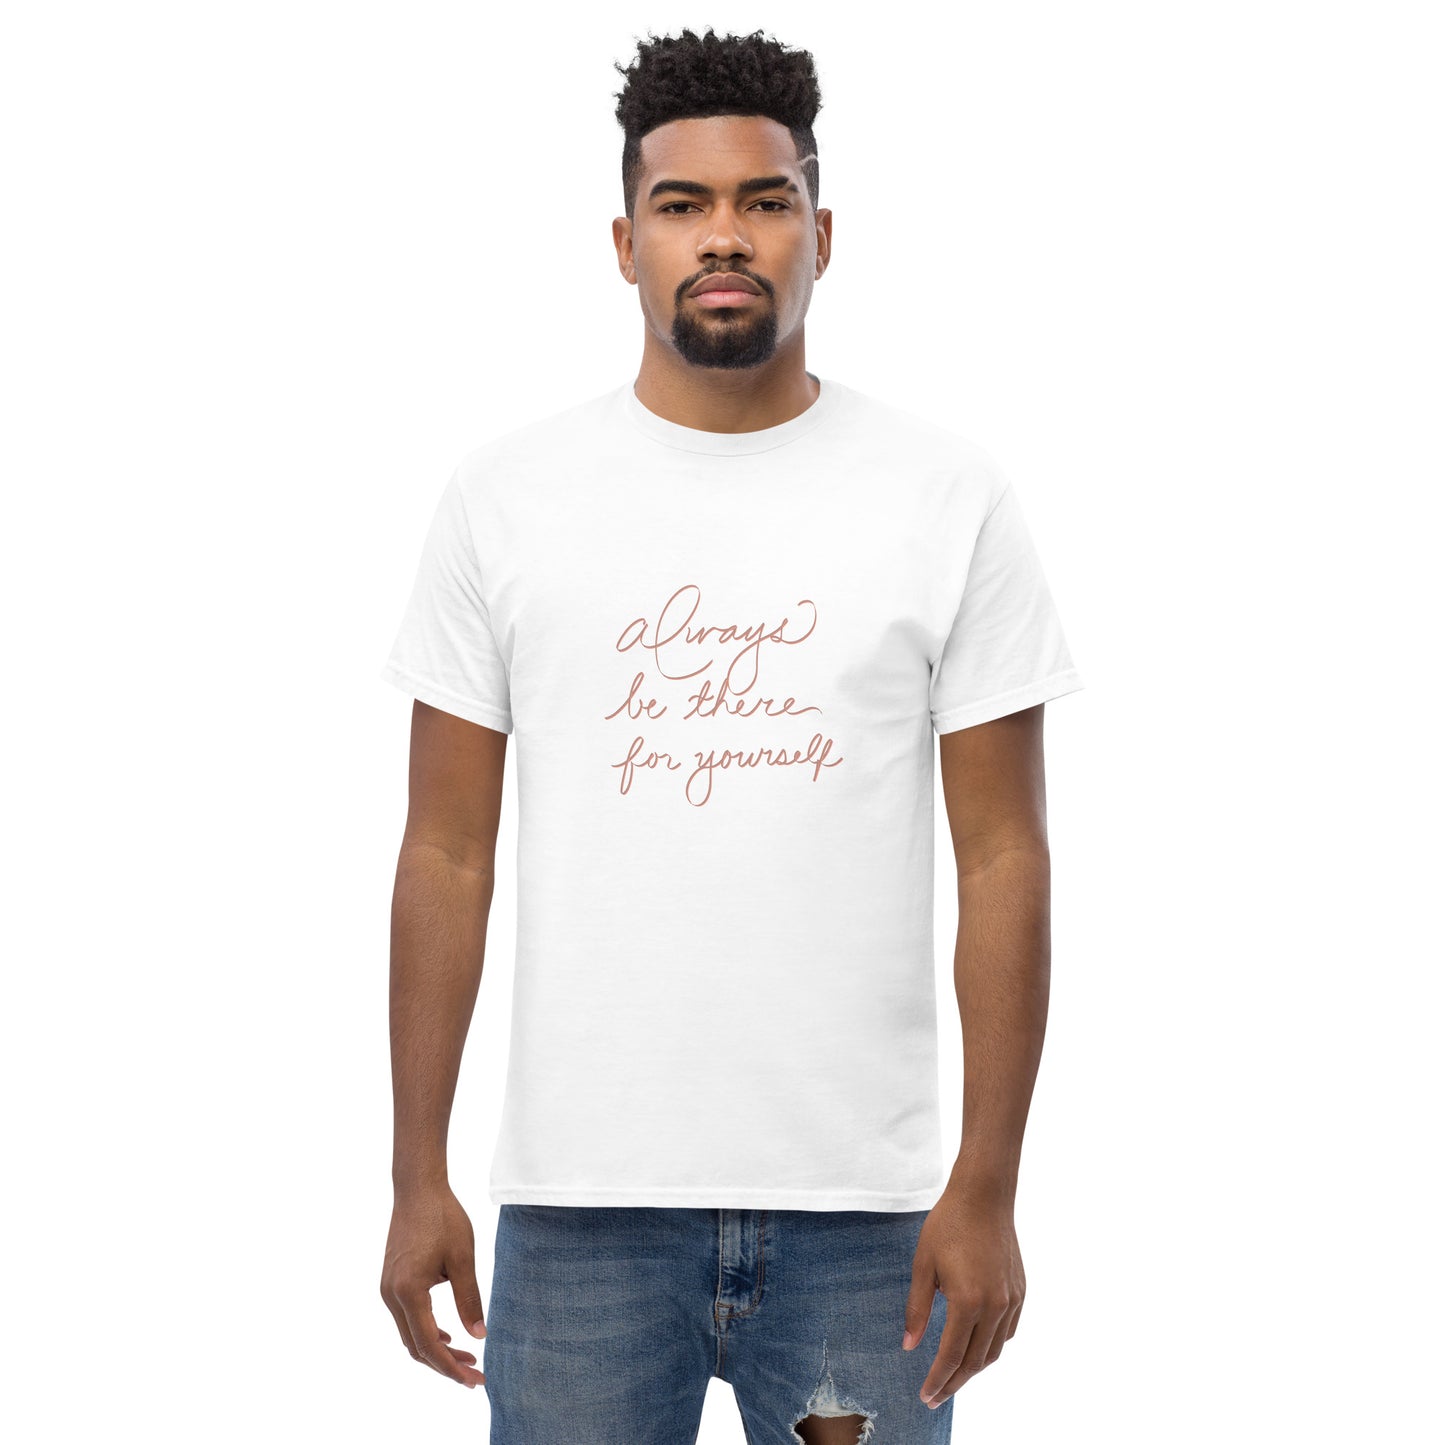 "Always Be There For Yourself" Men's classic tee